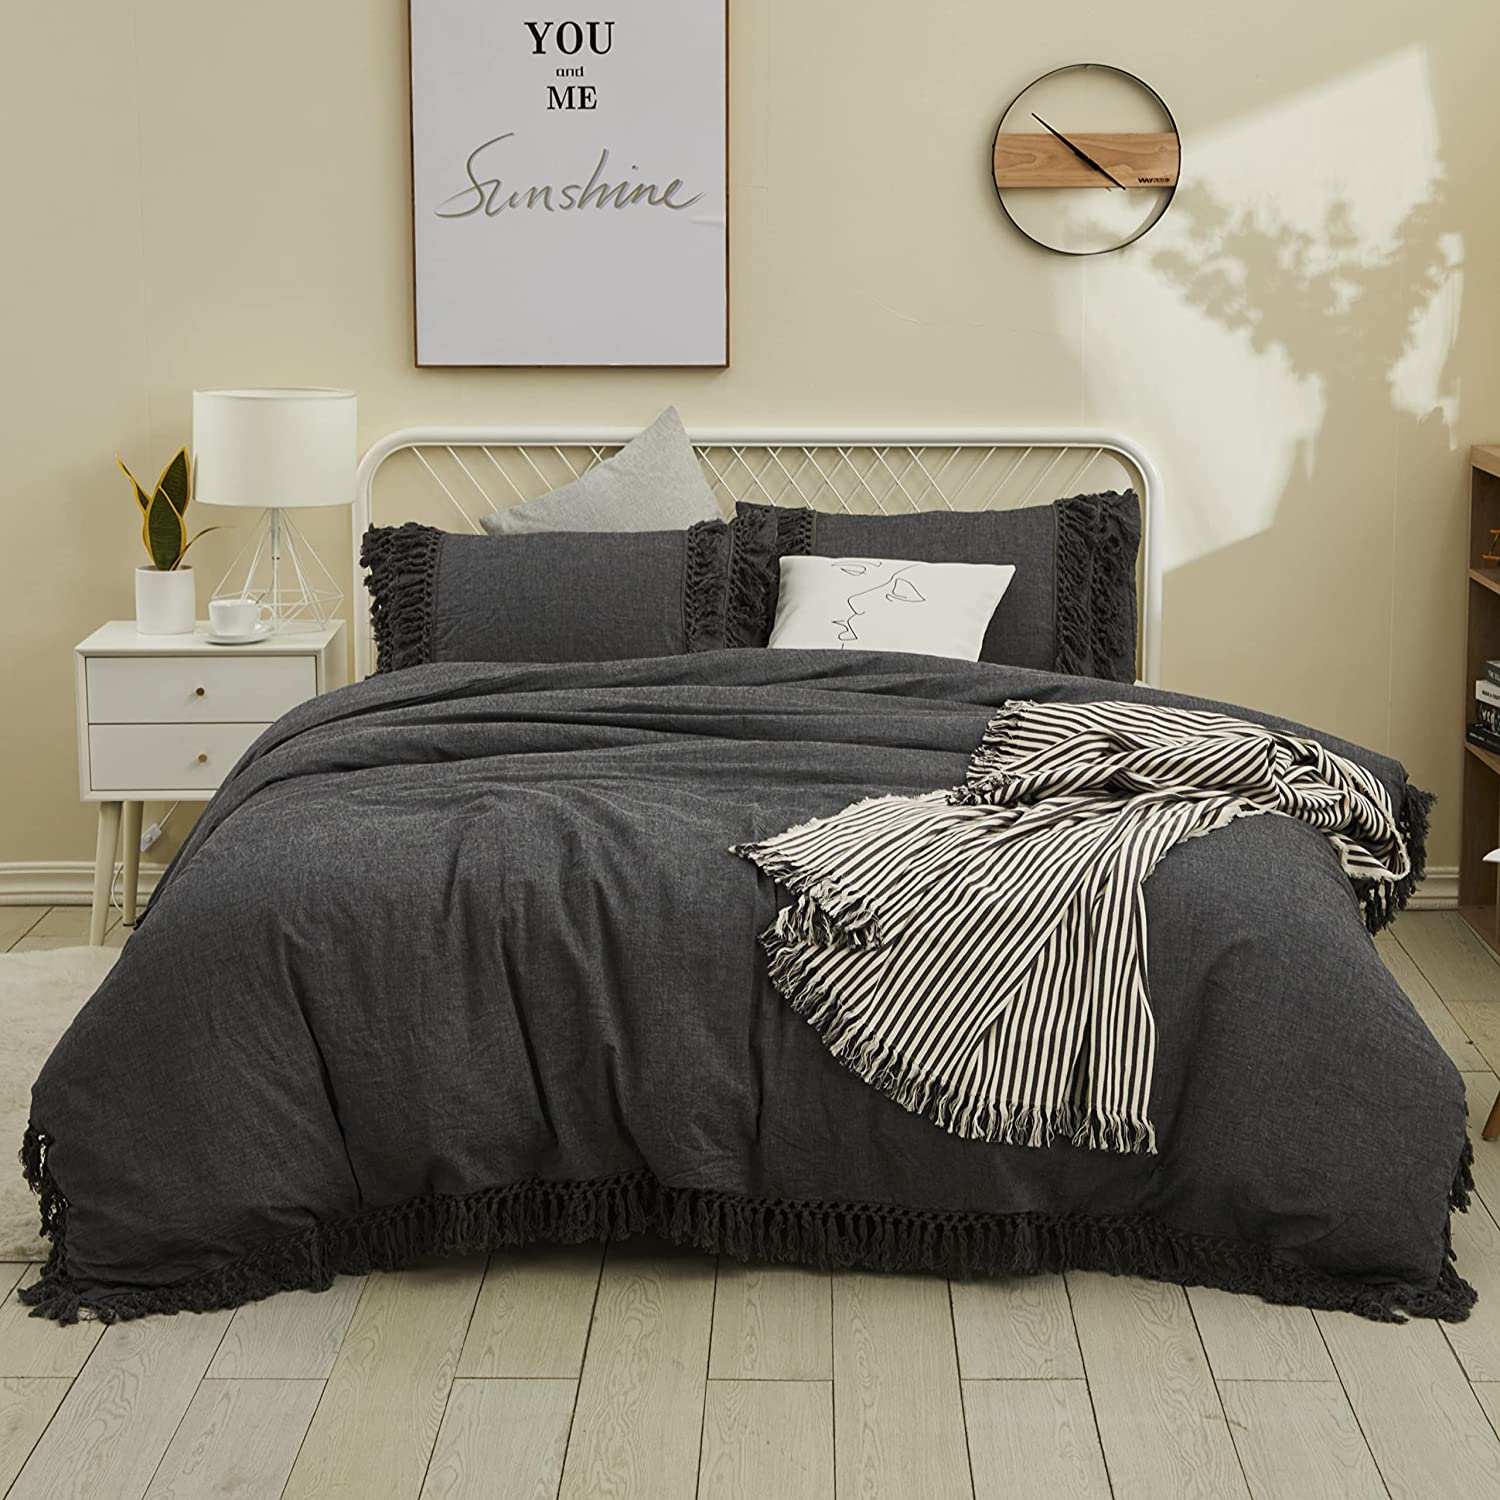 Price:$62.49  California King Duvet Cover 3 Pcs Boho Bedding Fringed Vintage and Shabby Tassel and Ruffle Bohemian Quilt Cover 100% Washed Cotton : Home & Kitchen